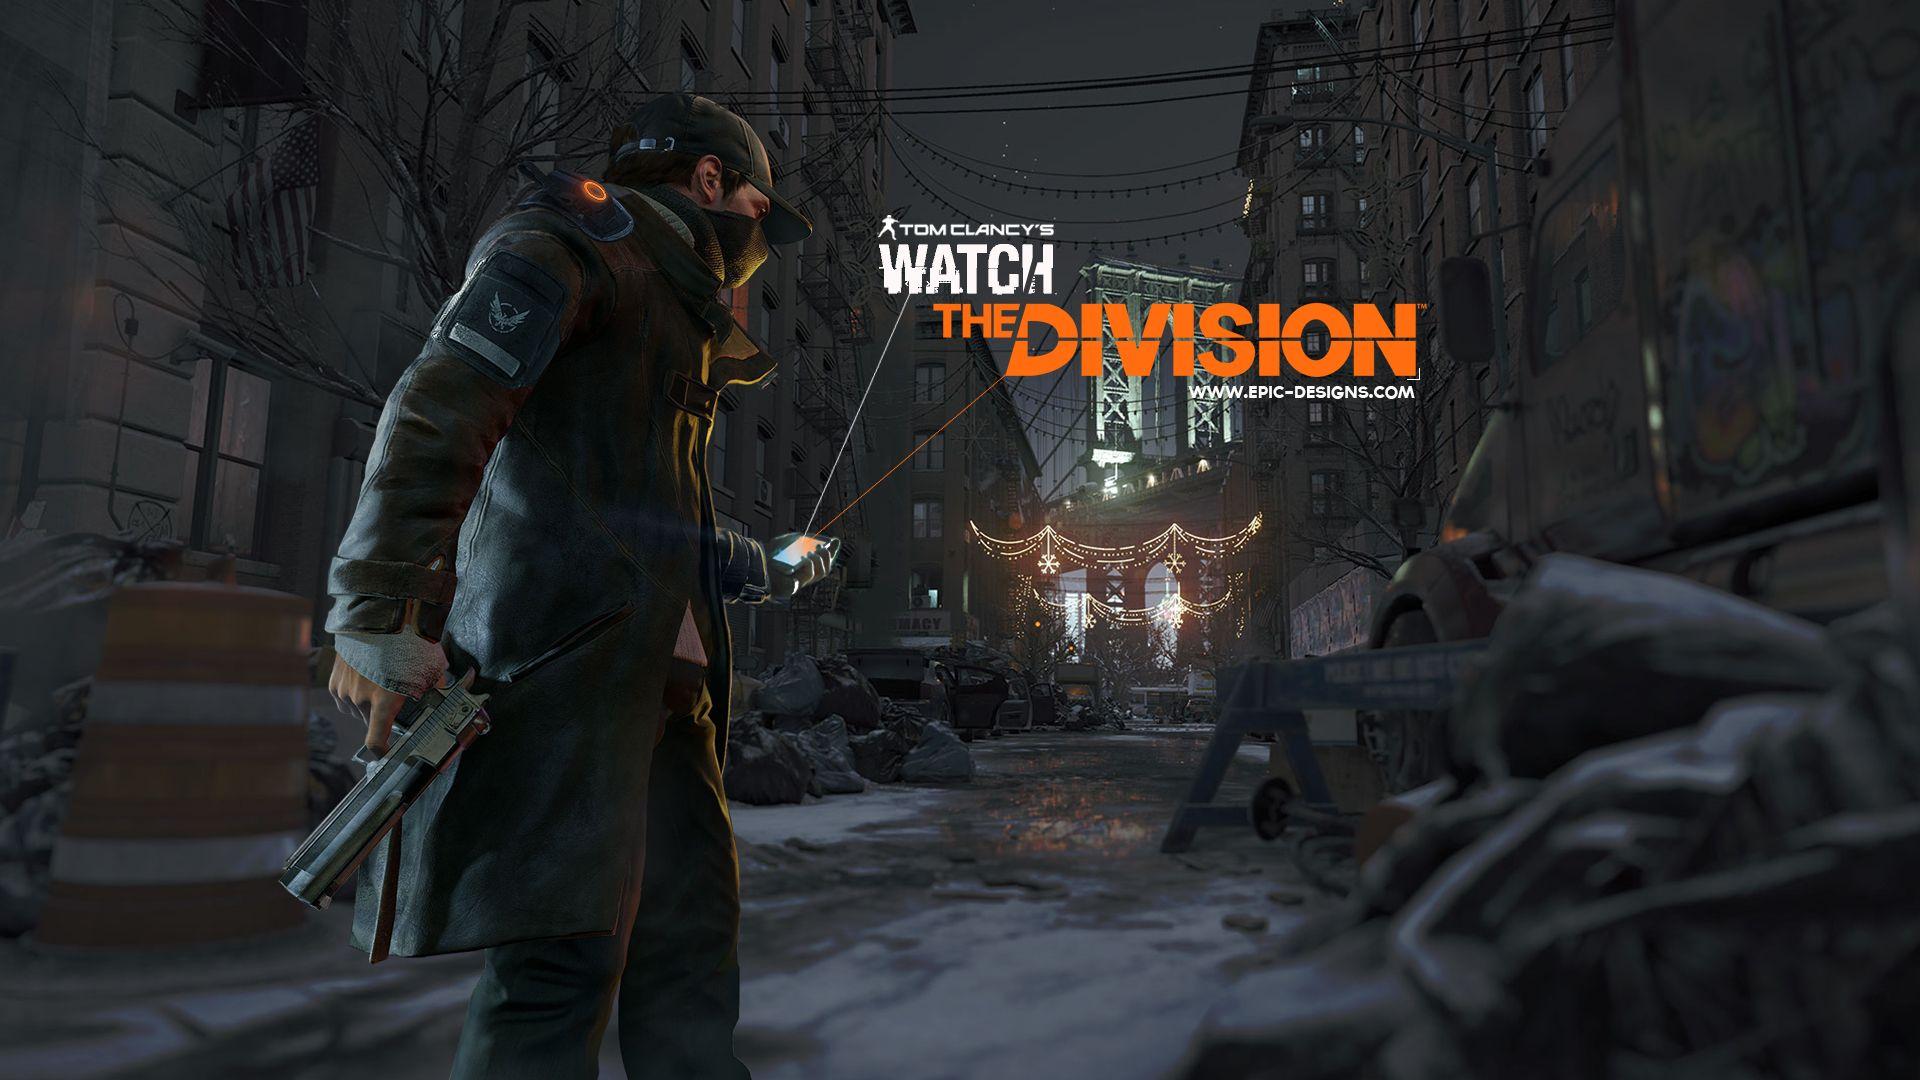 Watch the division wallpaper